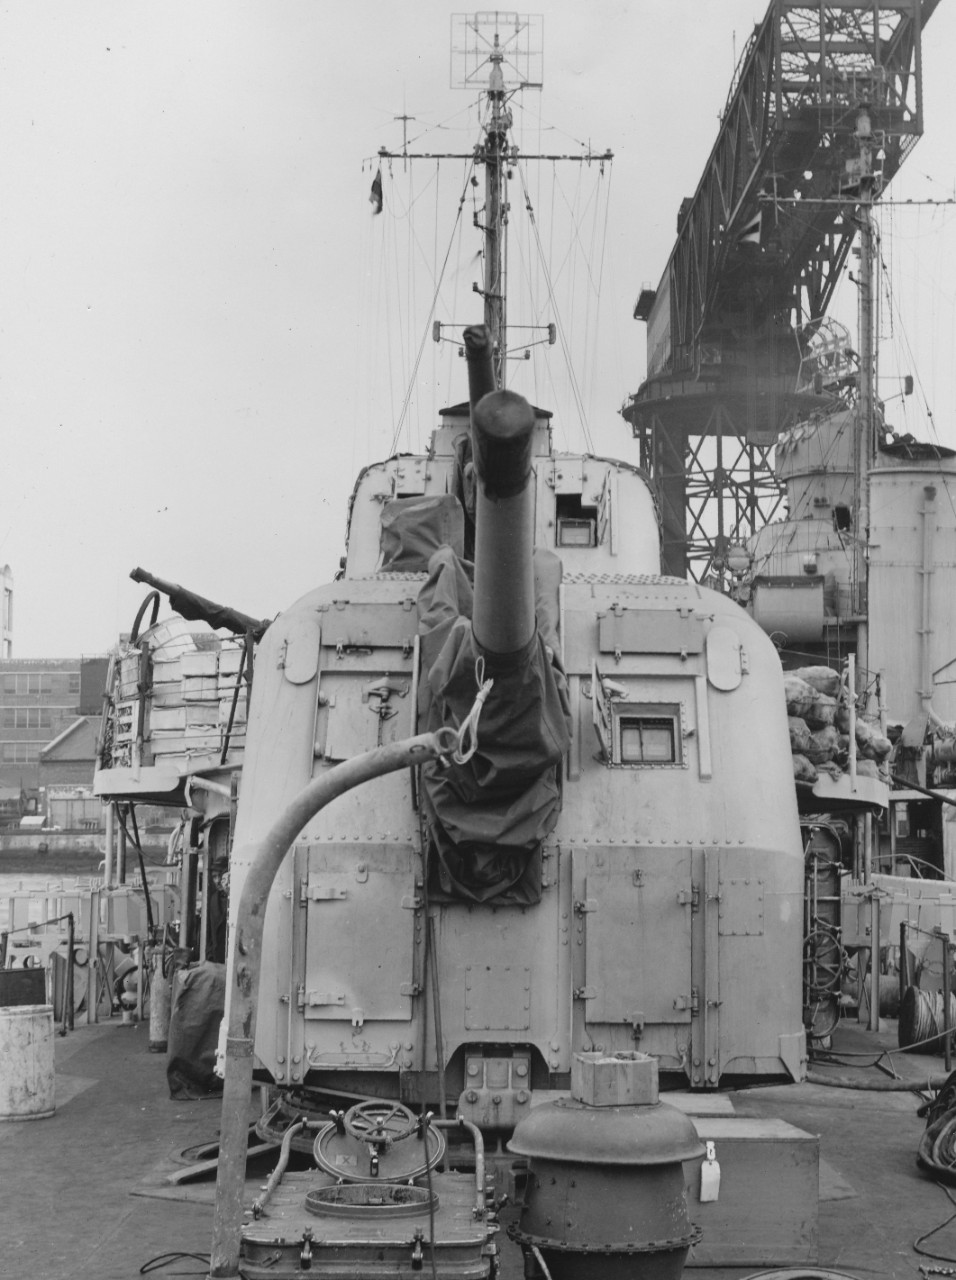 Looking forward from Rhind’s fantail during an availability at the New York Navy Yard, 30 November 1943. Note the unstowed provisions on the deck around Mt. 53, and the details of Mt. 54 in the foreground. (U.S. Navy Bureau of Ships Photograph BS...